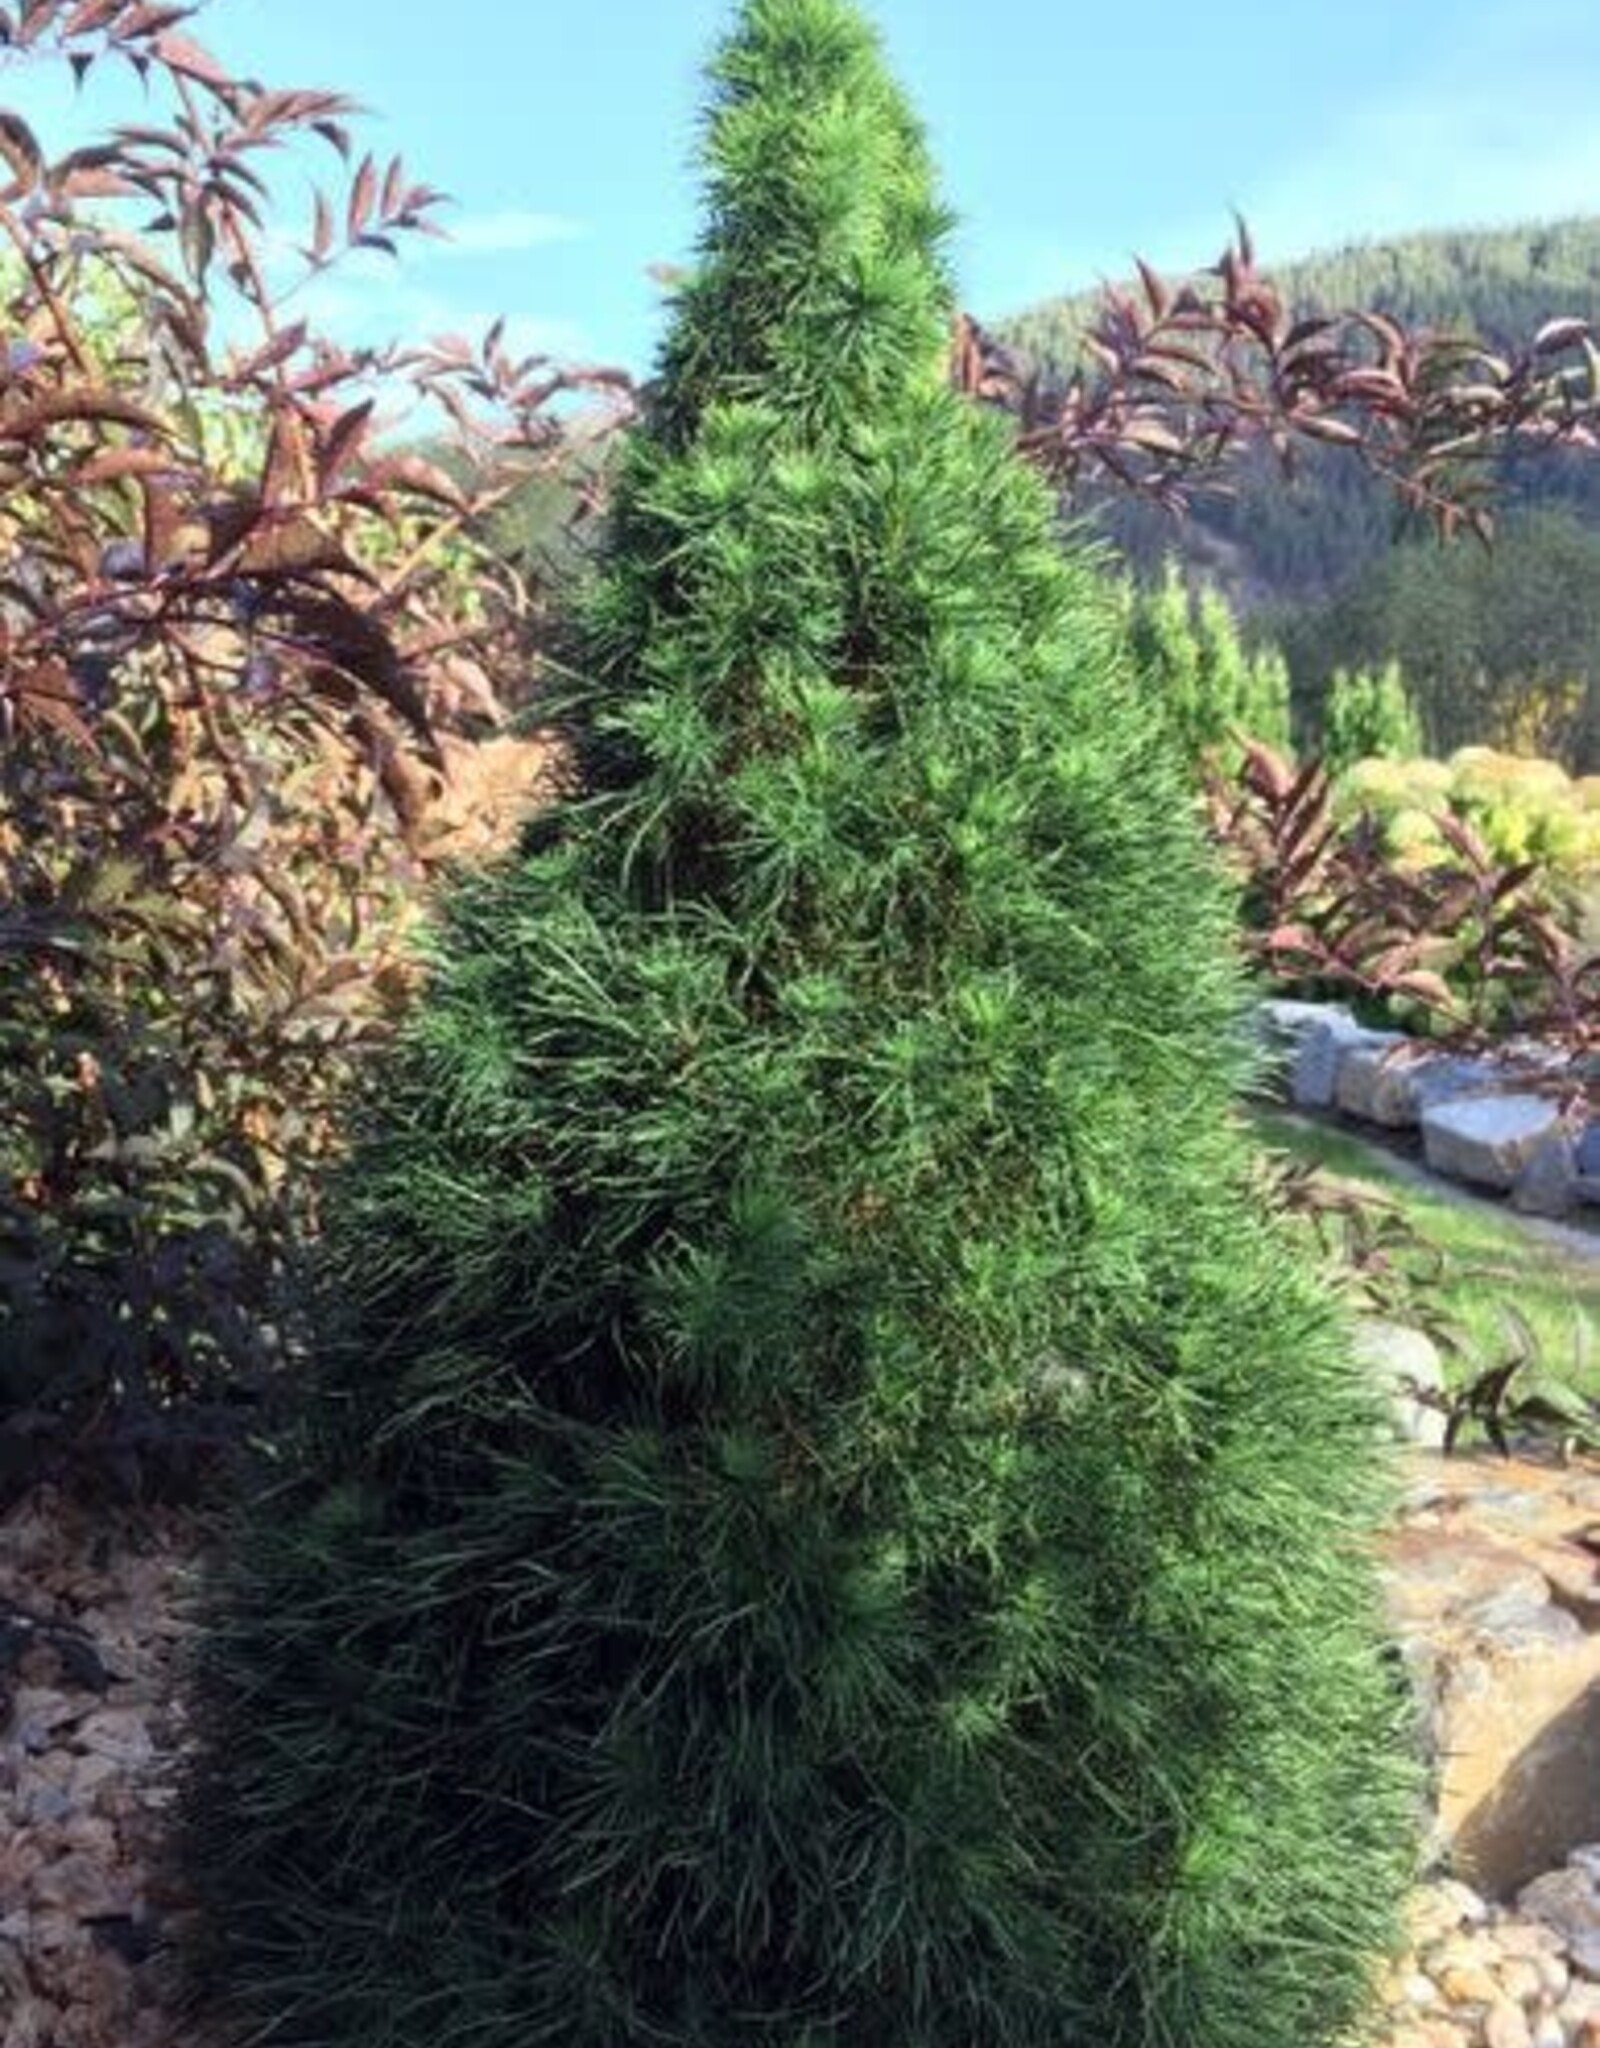 Bron and Sons Pinus syl. 'Green Penguin' #5 Green Penguin Scotch Pine